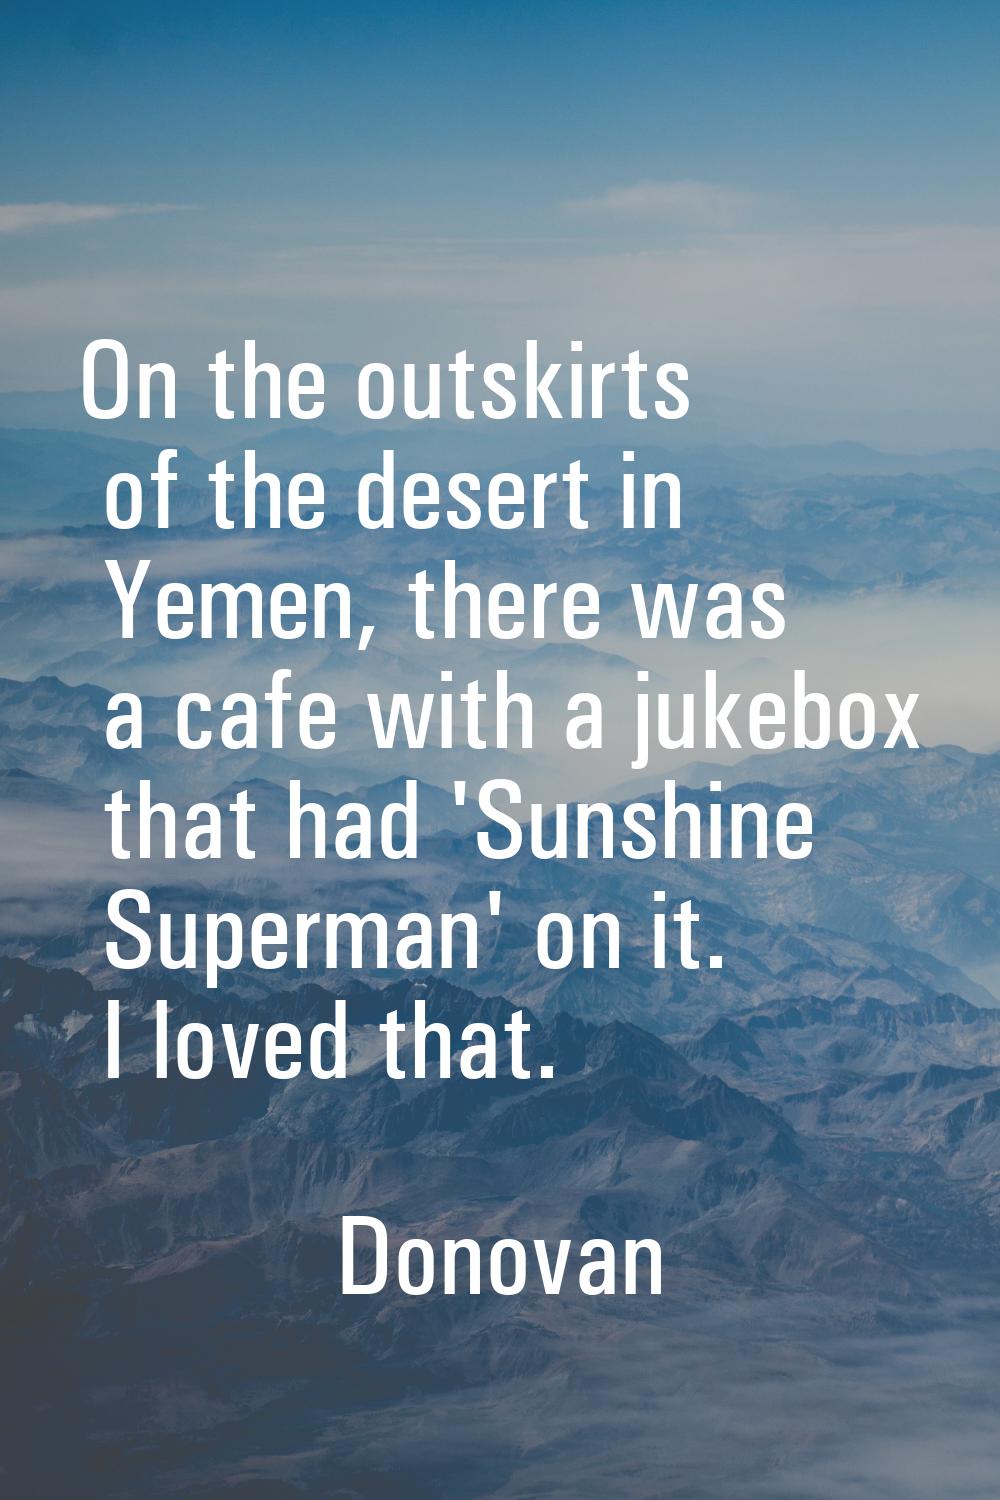 On the outskirts of the desert in Yemen, there was a cafe with a jukebox that had 'Sunshine Superma